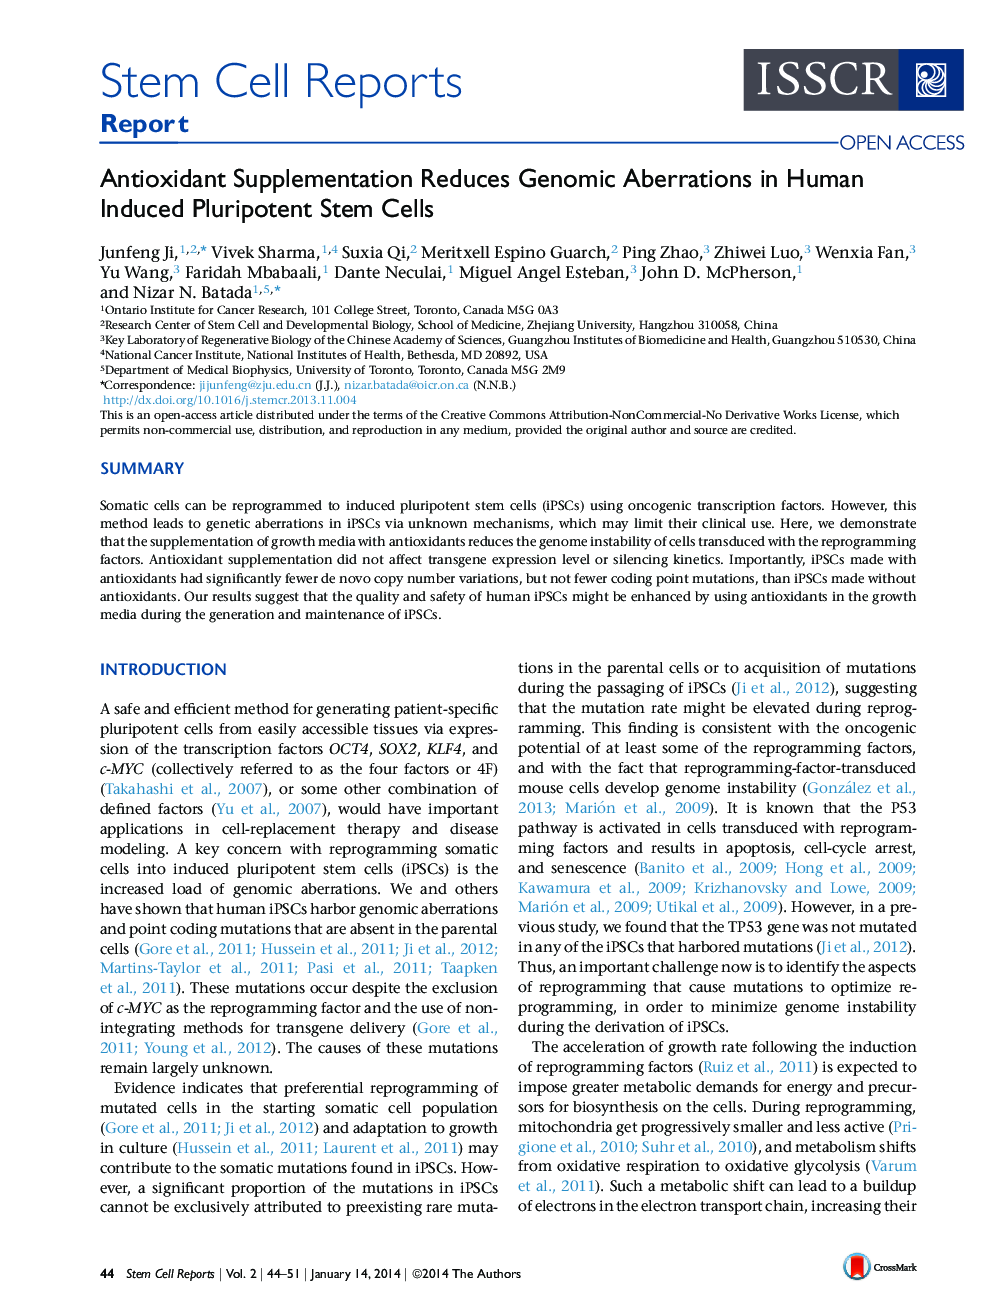 Antioxidant Supplementation Reduces Genomic Aberrations in Human Induced Pluripotent Stem Cells 